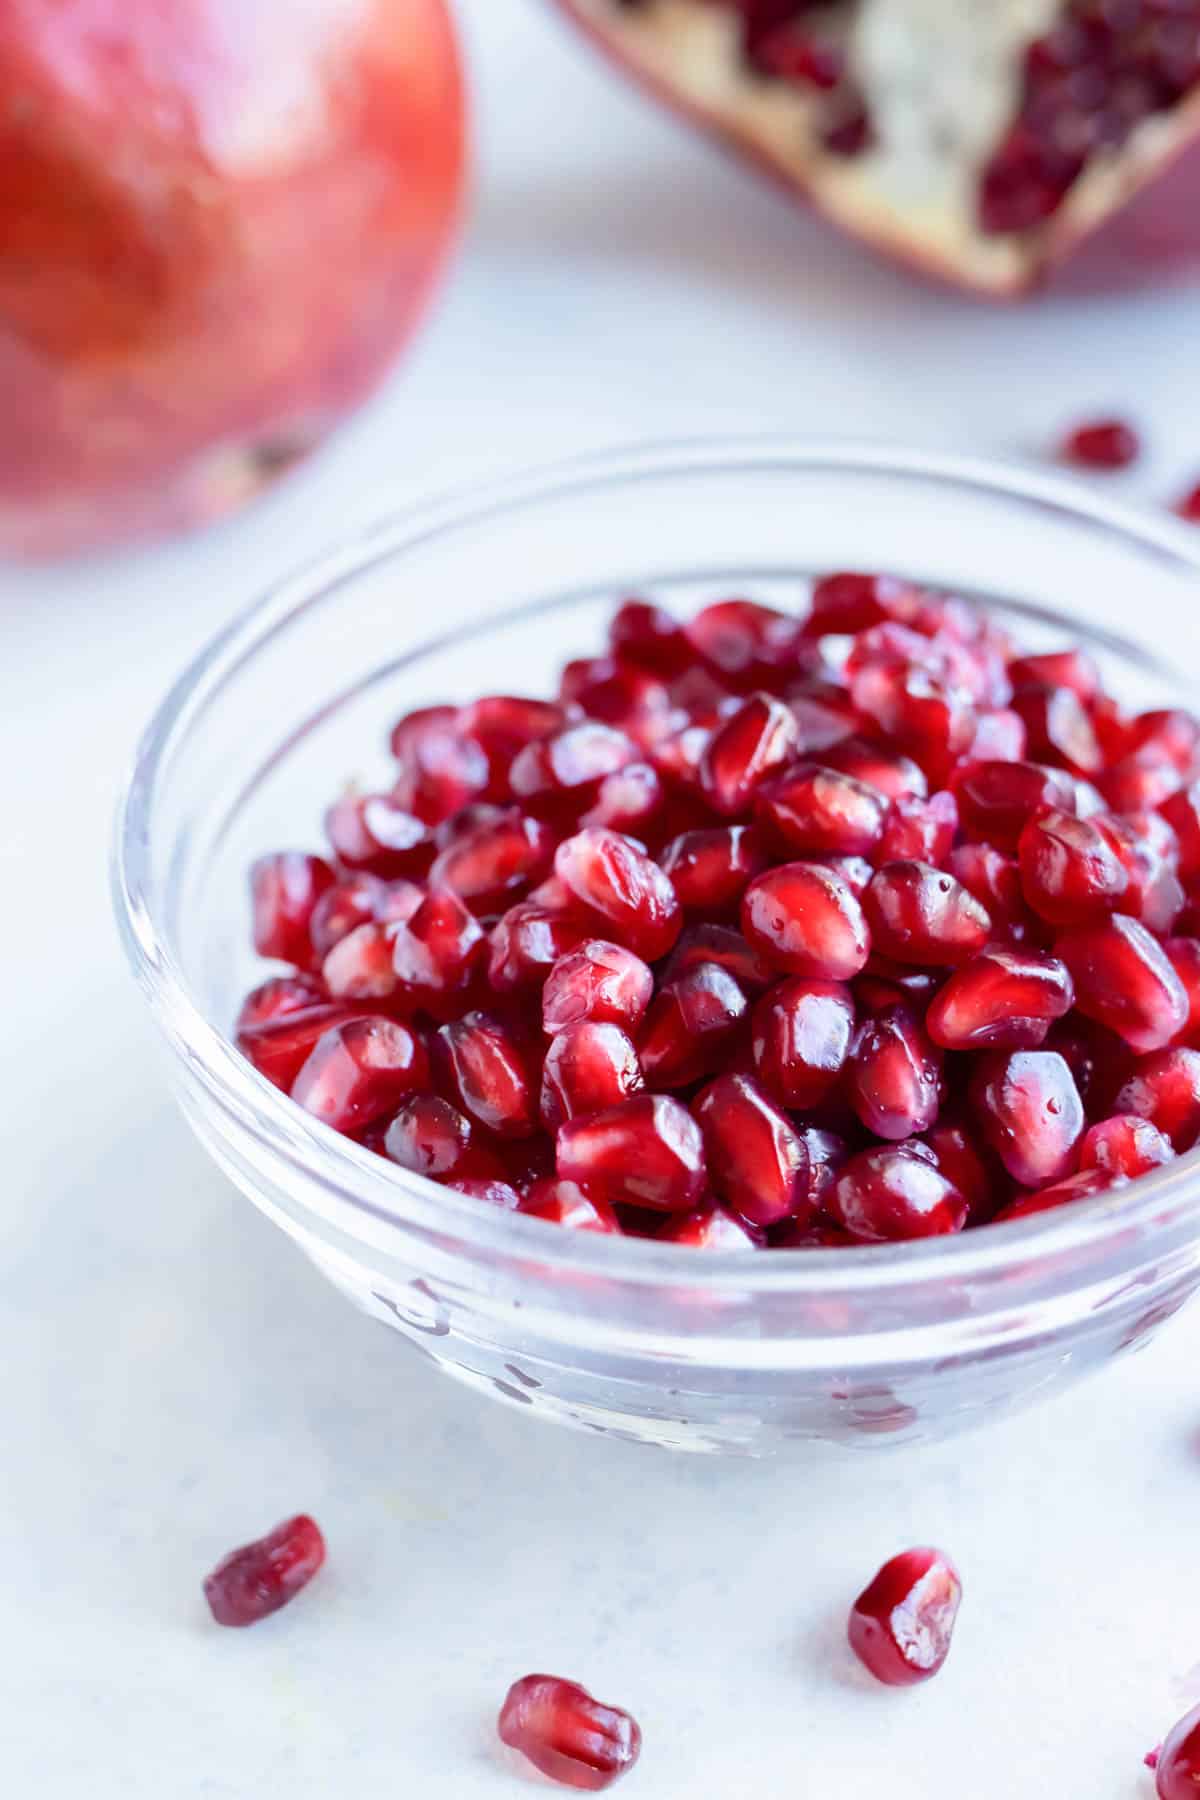 A glass bowl is used to hold the whole pomegranate seeds.